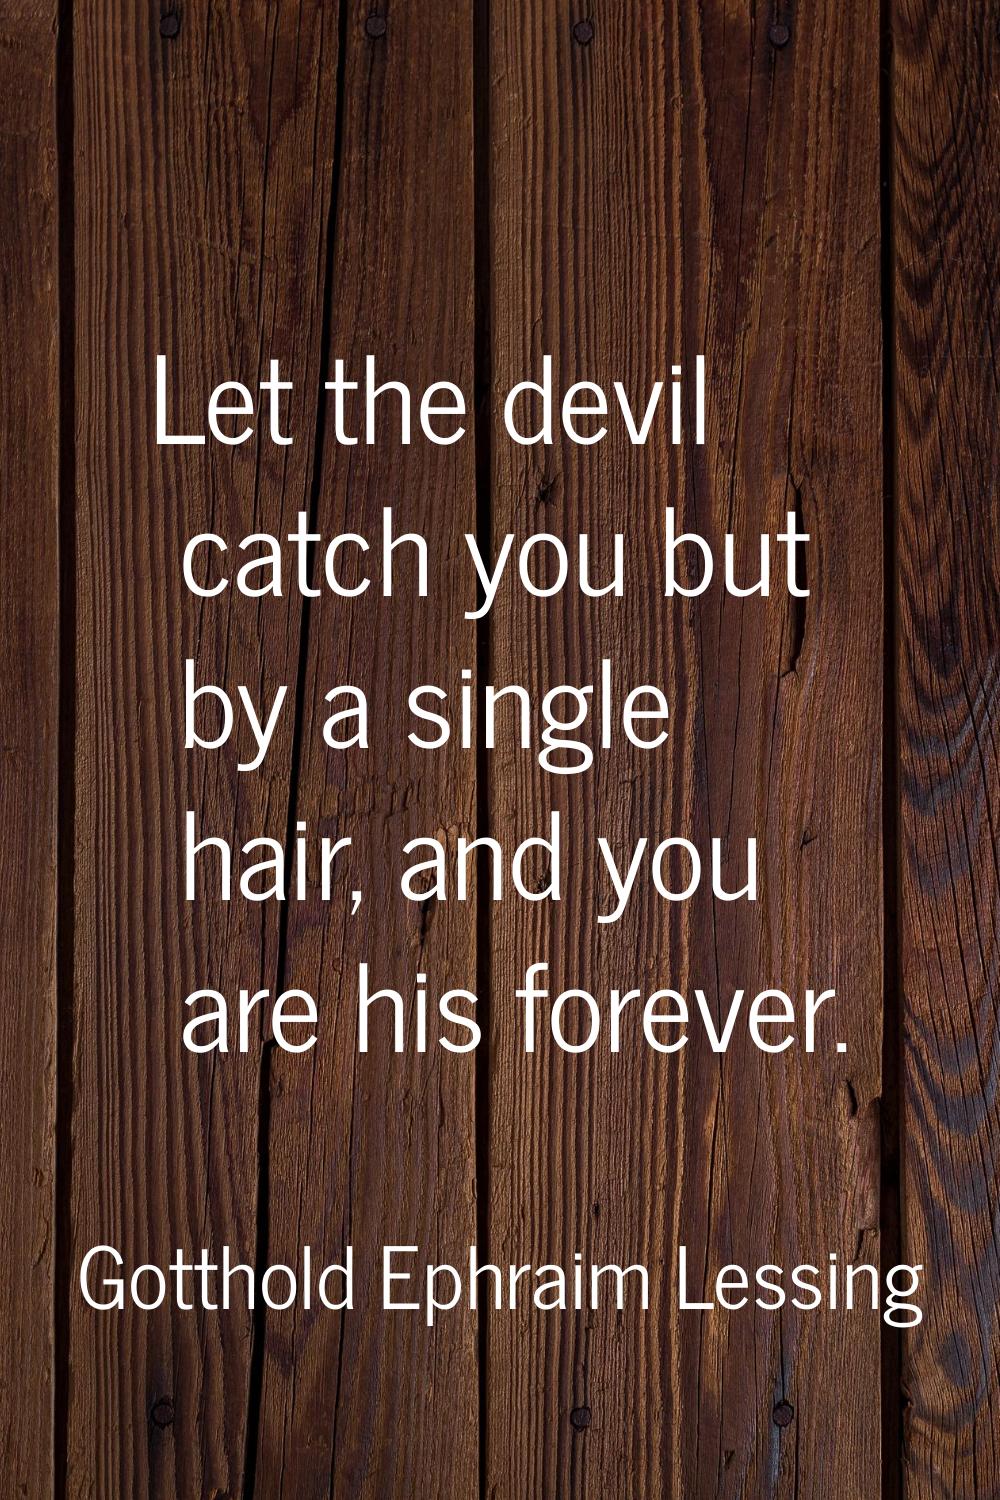 Let the devil catch you but by a single hair, and you are his forever.